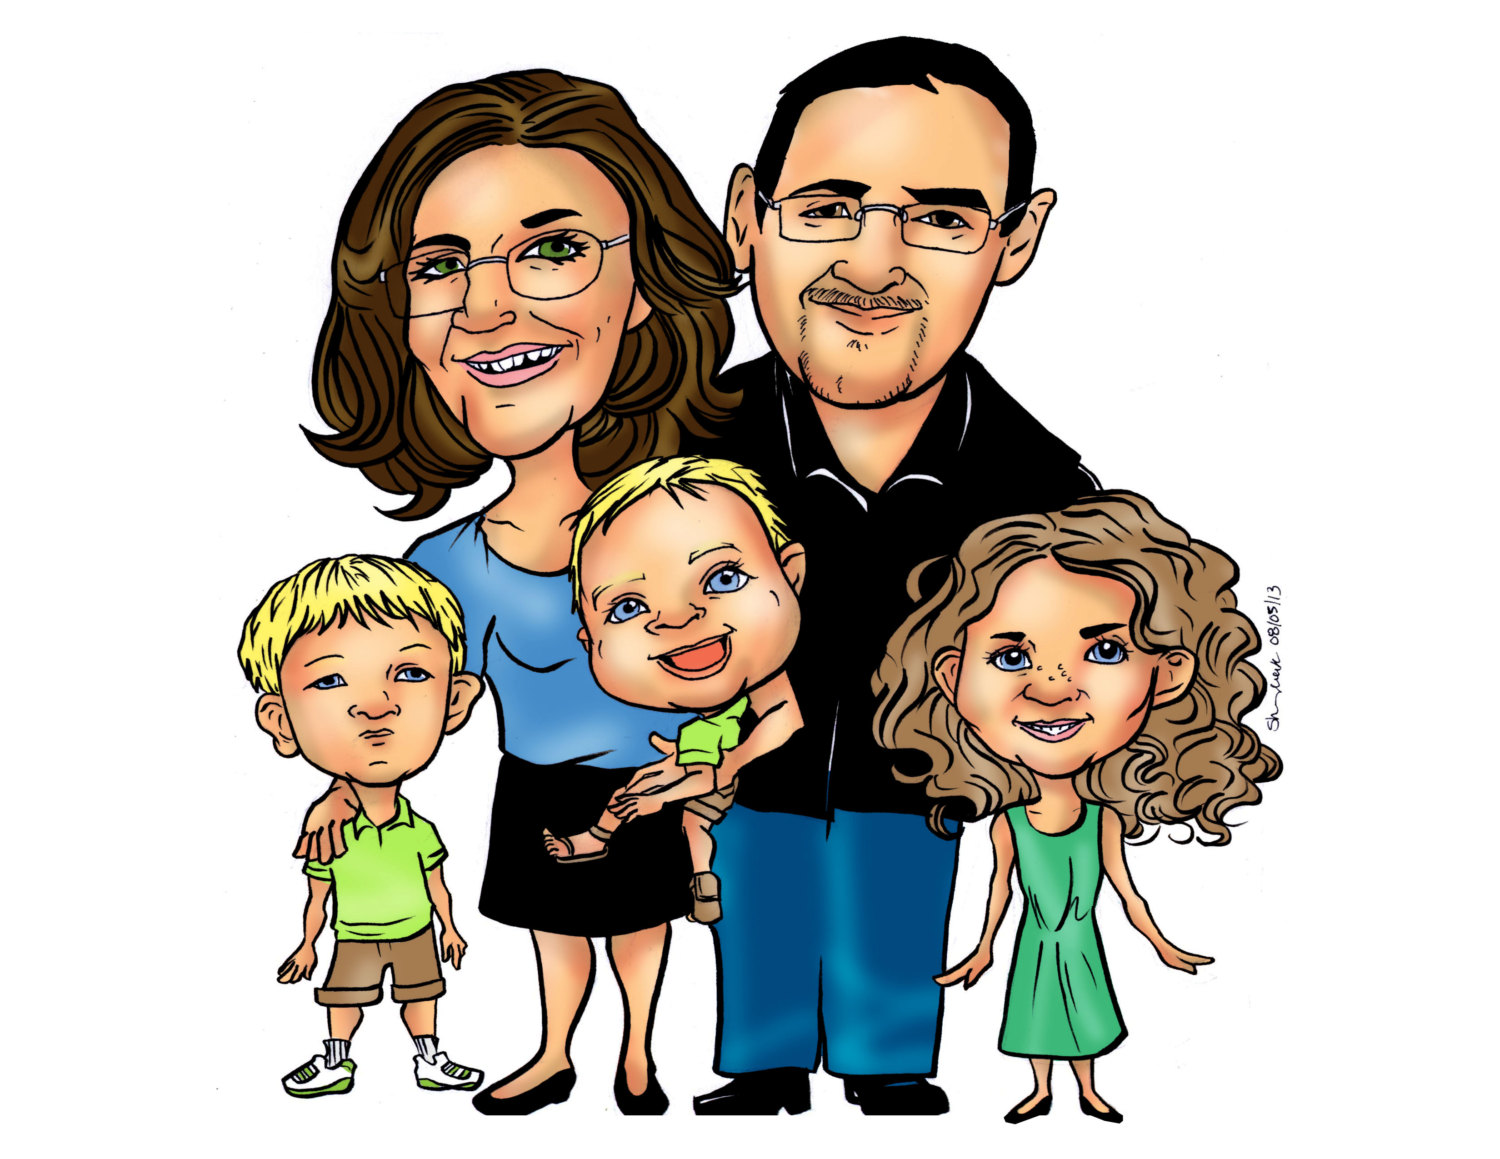 Custom Family Cartoon Caricature Portrait by CaricaturesByEmail